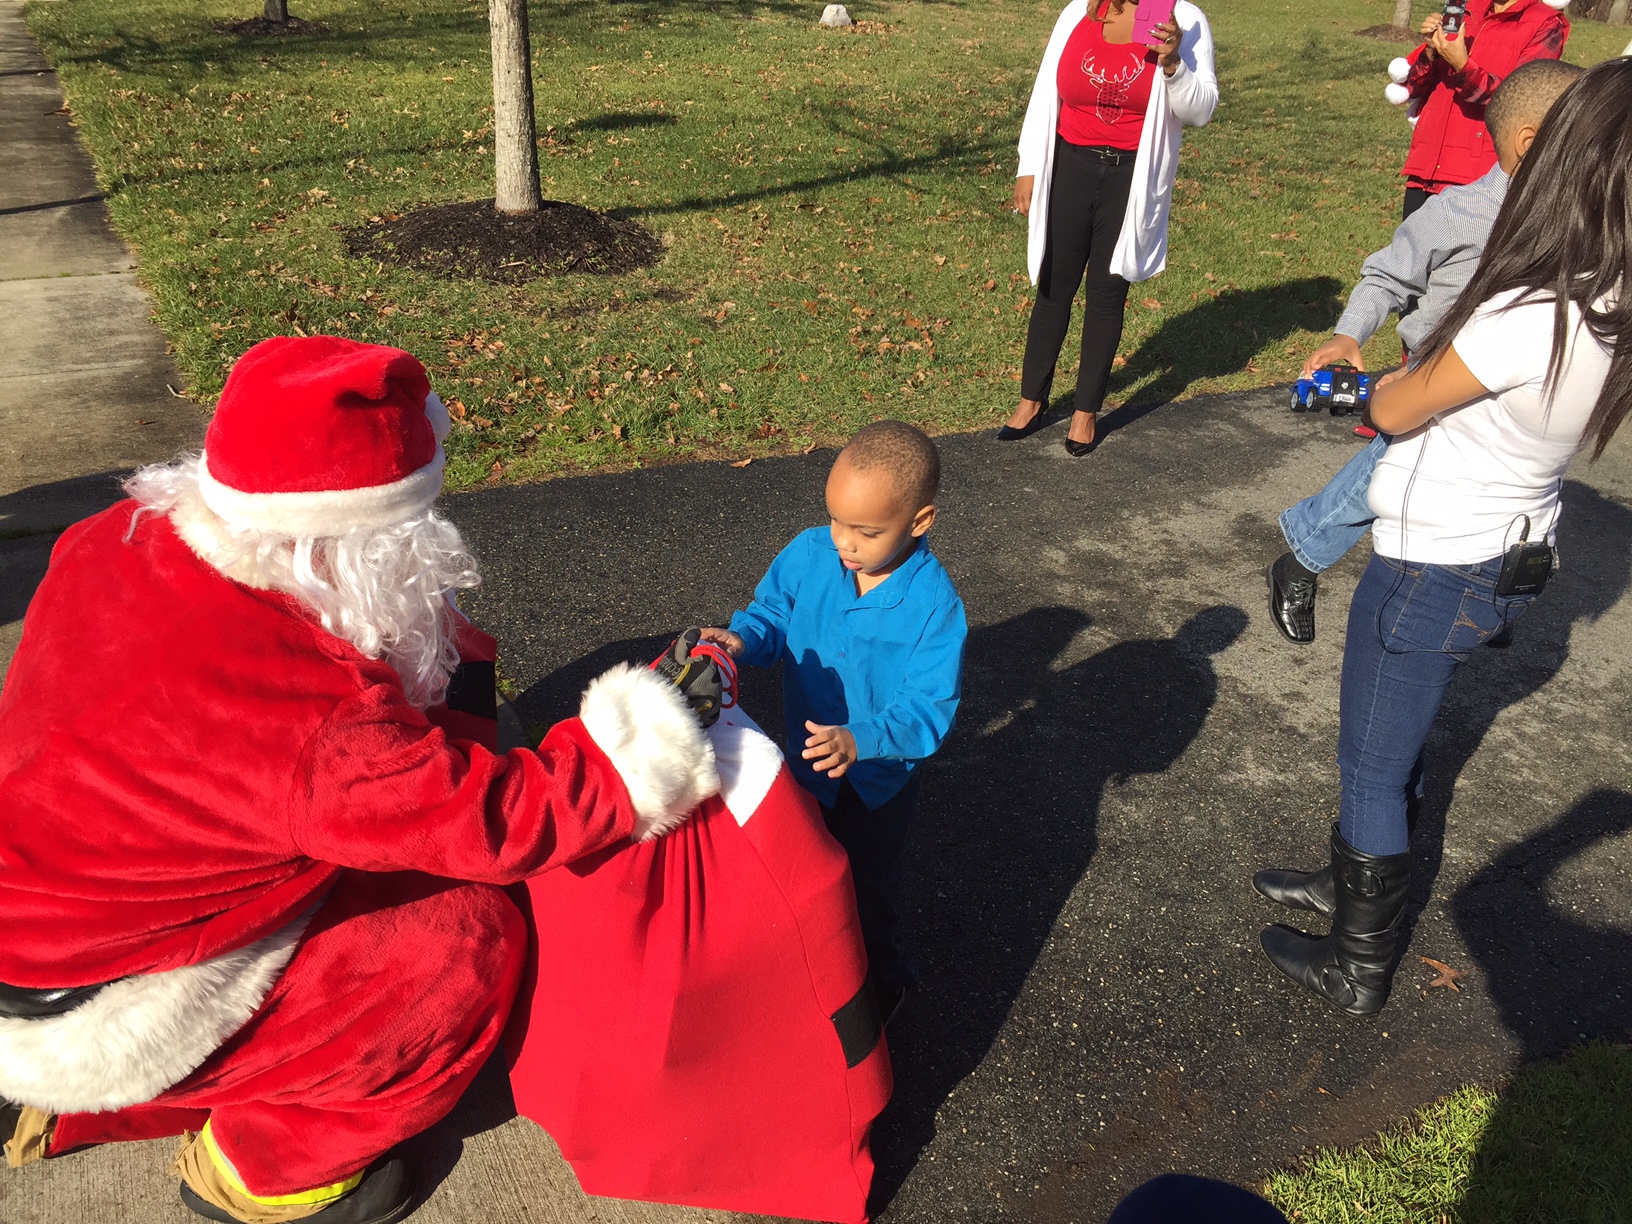 Santa hands a bag of toys to a boy in Upper Marlboro, Md. on Sunday, Dec. 25. 2016. Police say he and his brother were victims of domestic violence. The boys were reunited with their rescuer on Sunday. (WTOP/John Domen)